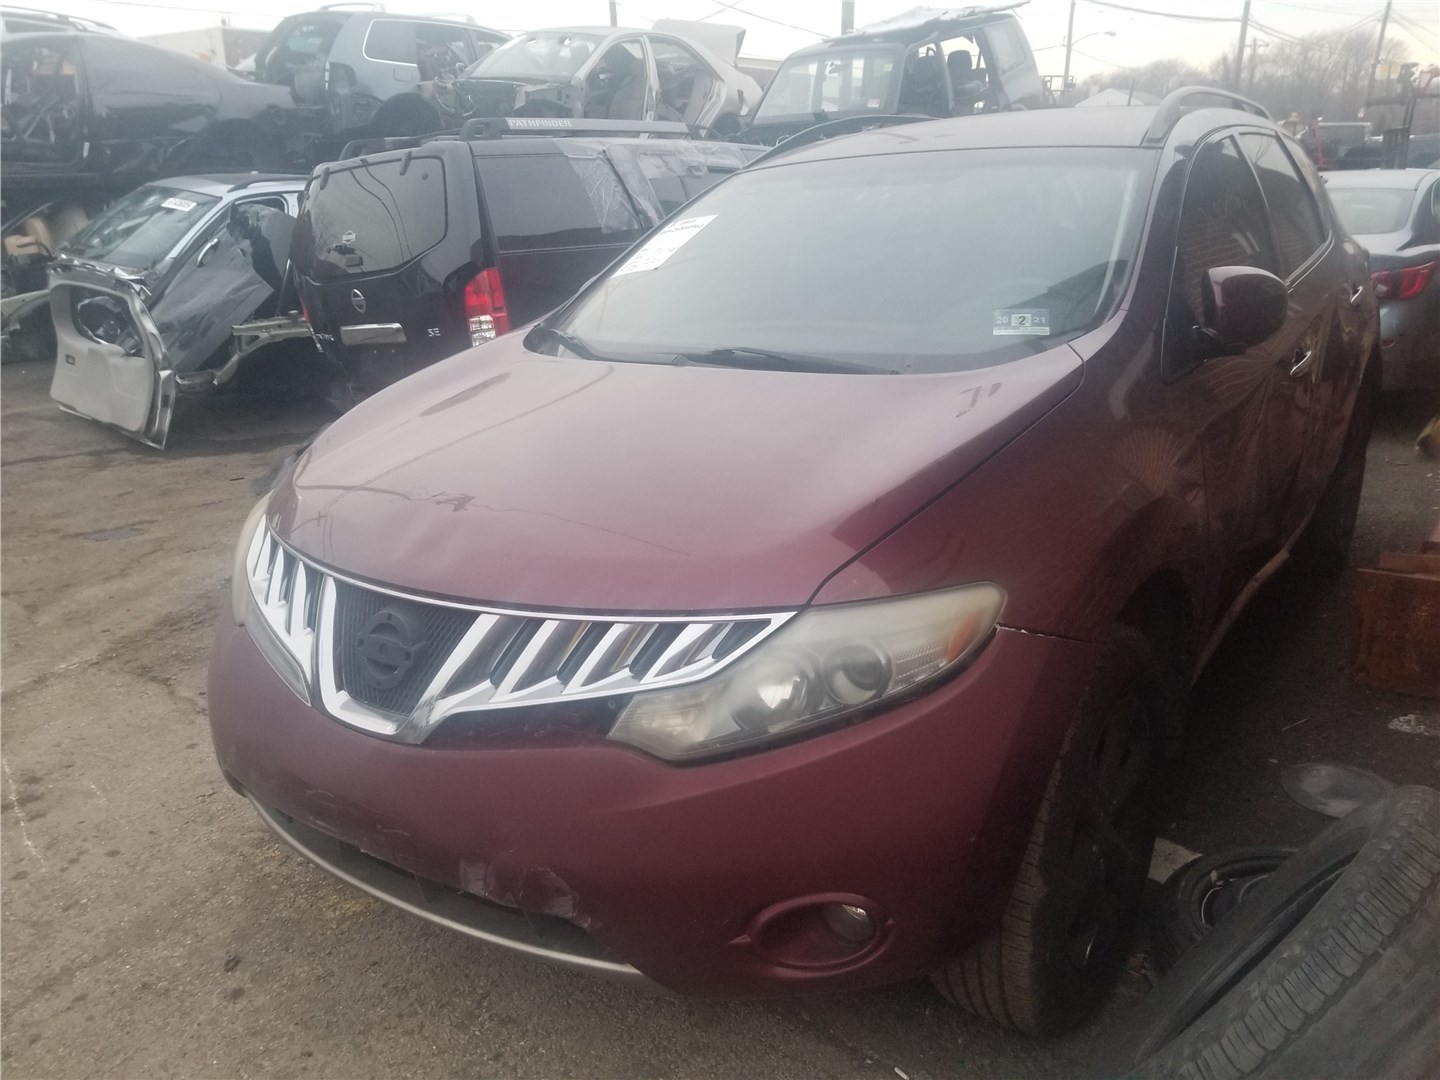 806711AN0A Ручка двери салона Nissan Murano 2008-2010 2009